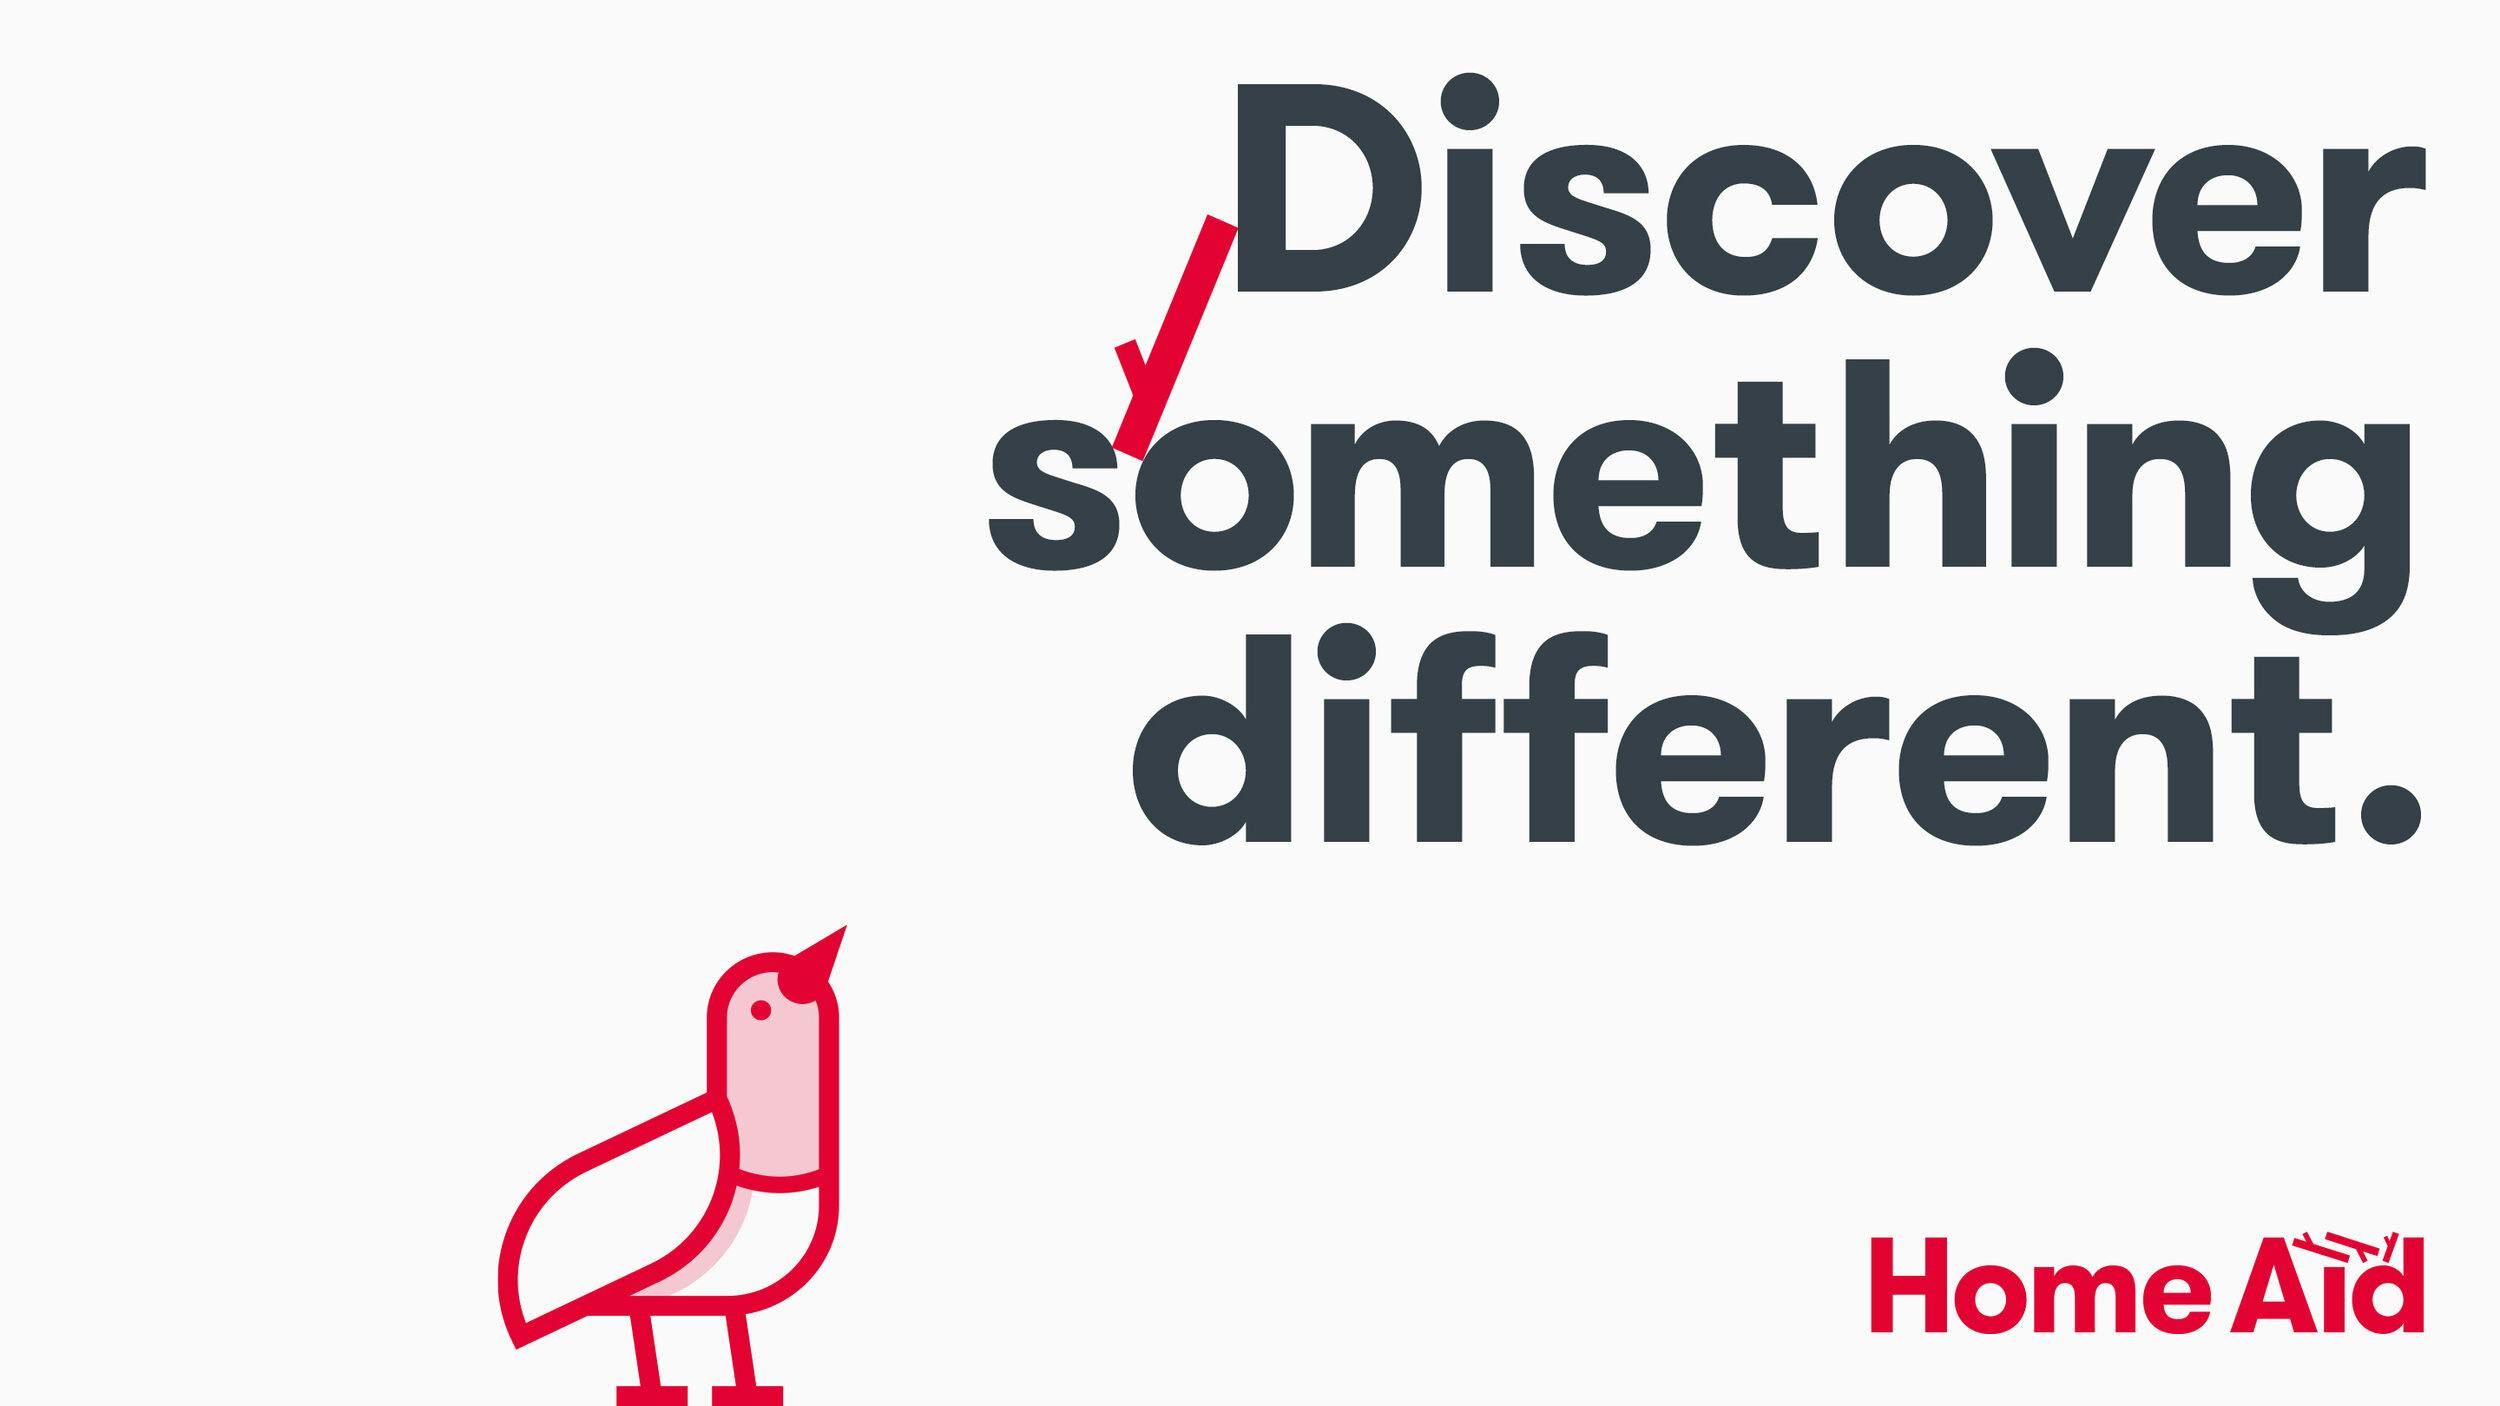 HomeAid West Lothian "Discover something different"